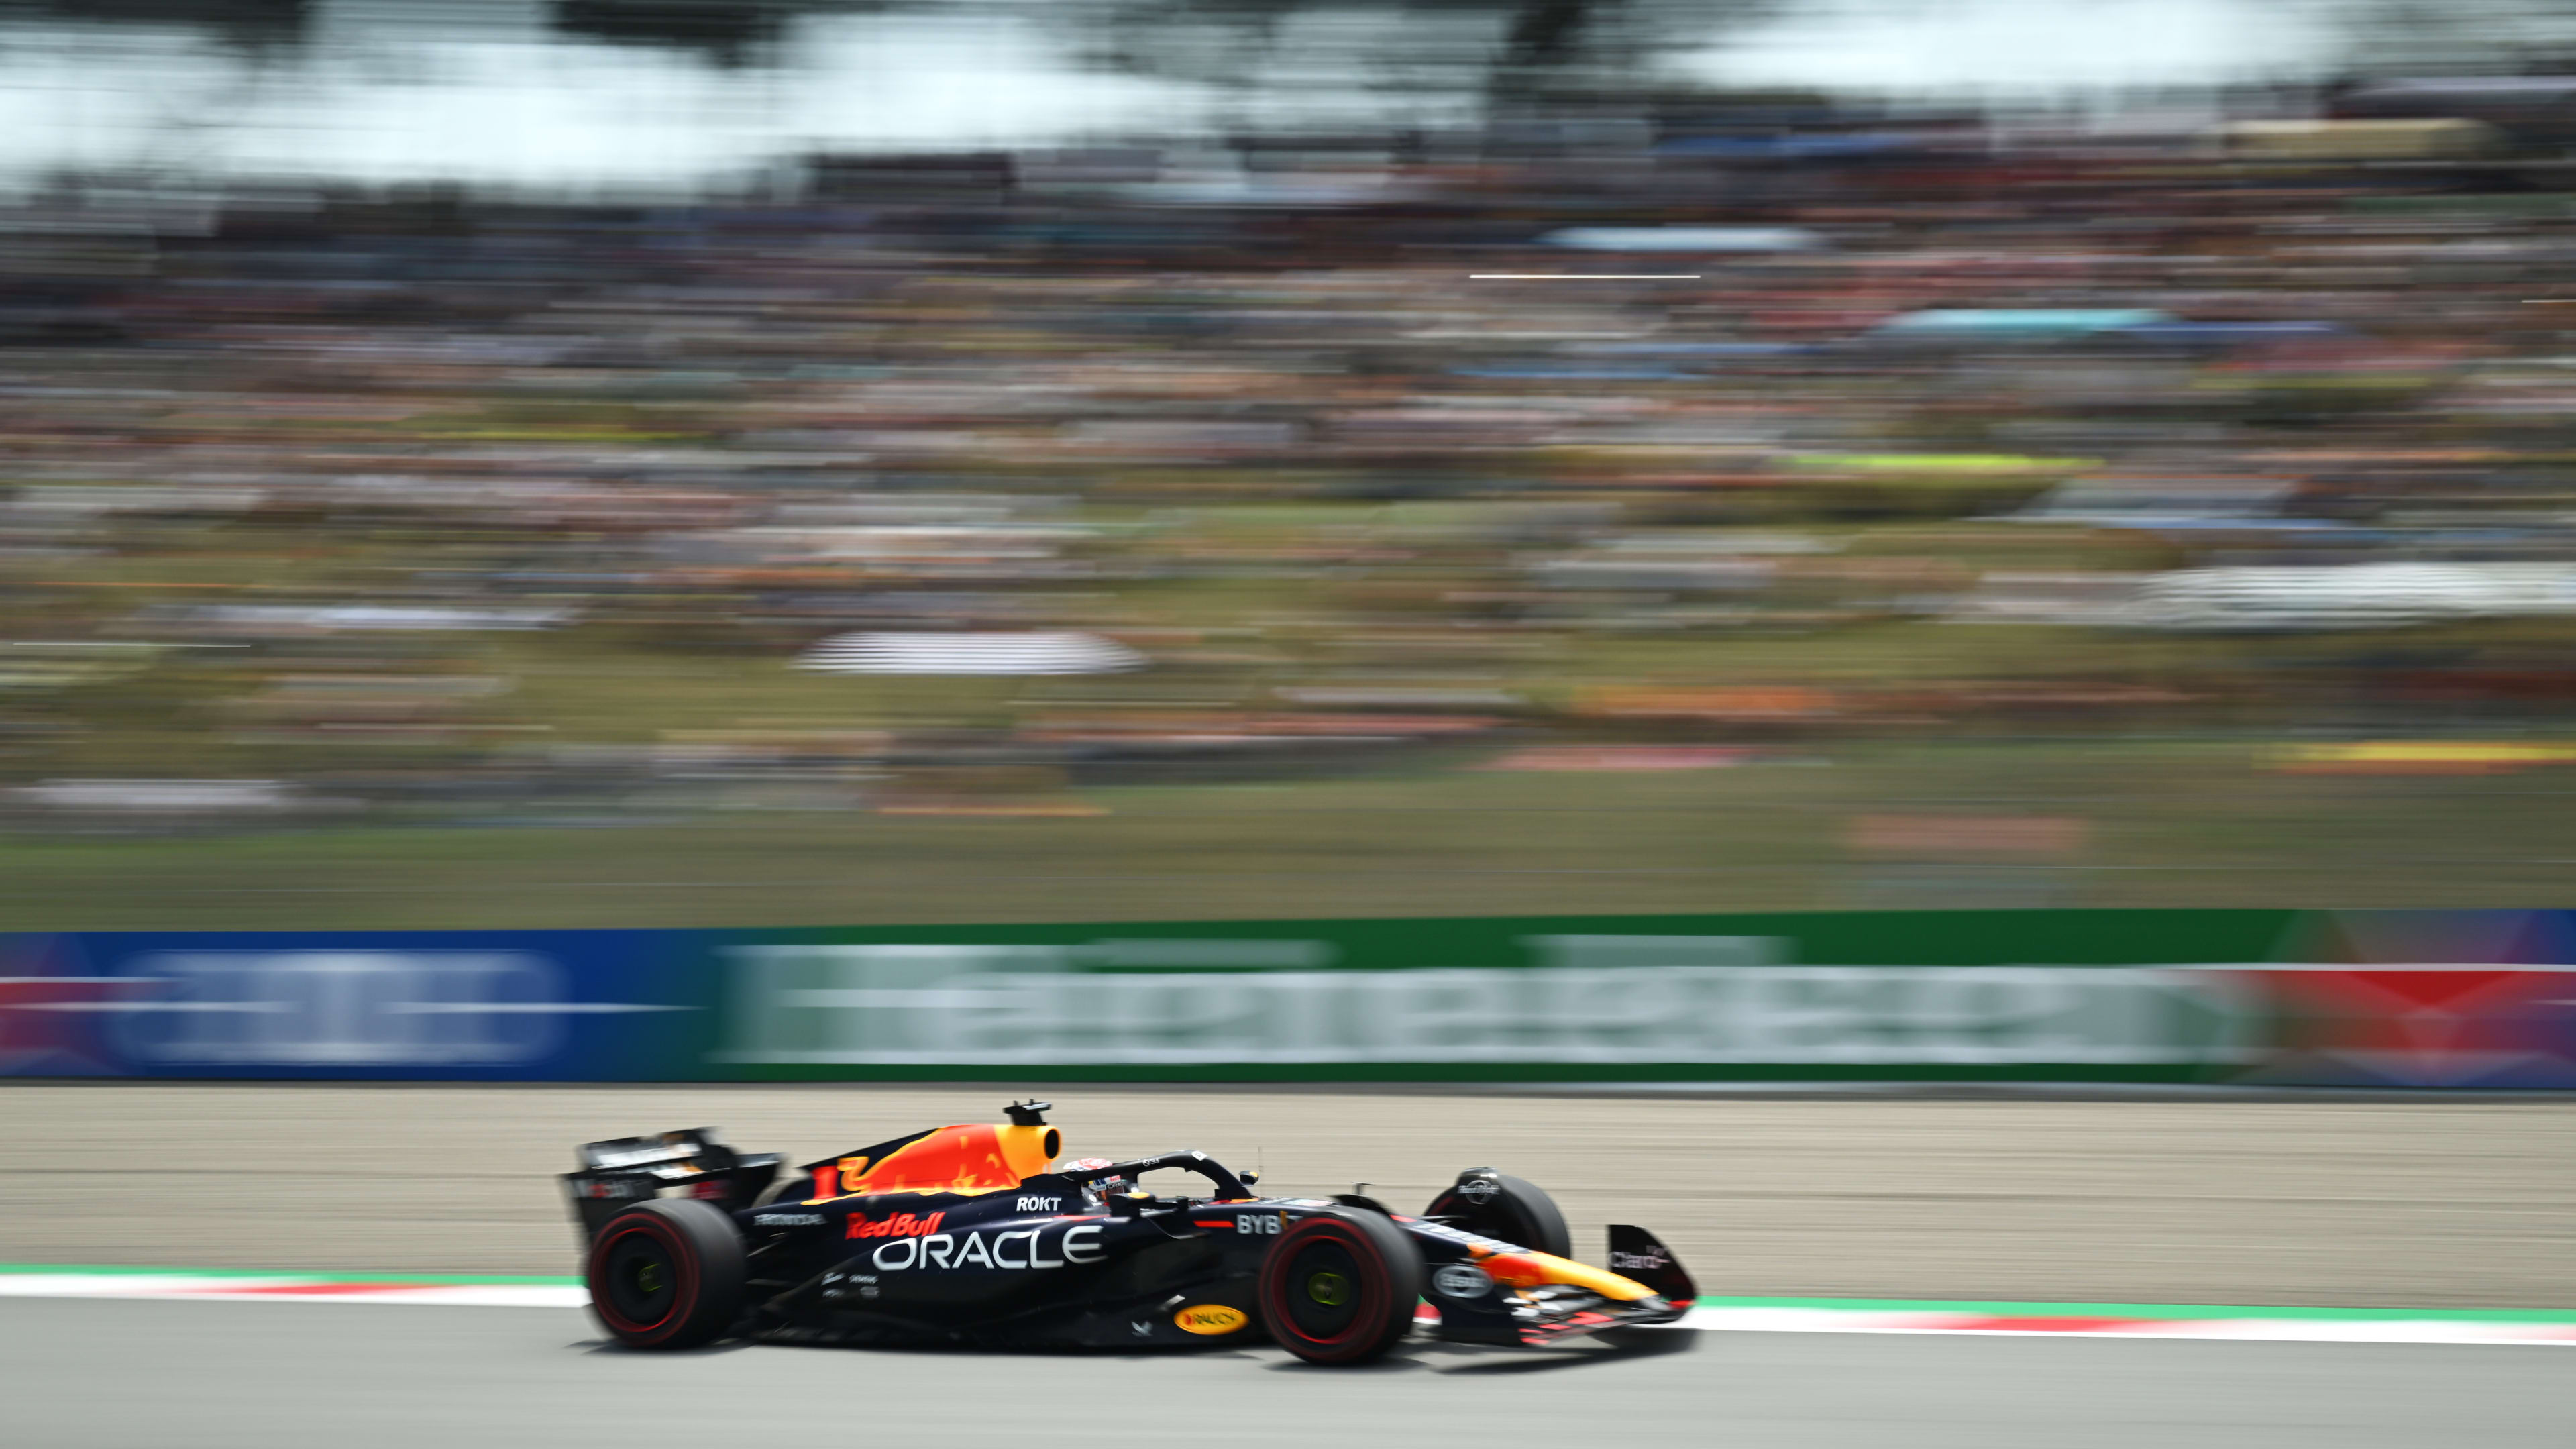 FP1 Verstappen comfortably leads Perez and Ocon during first practice session in Barcelona Formula 1®